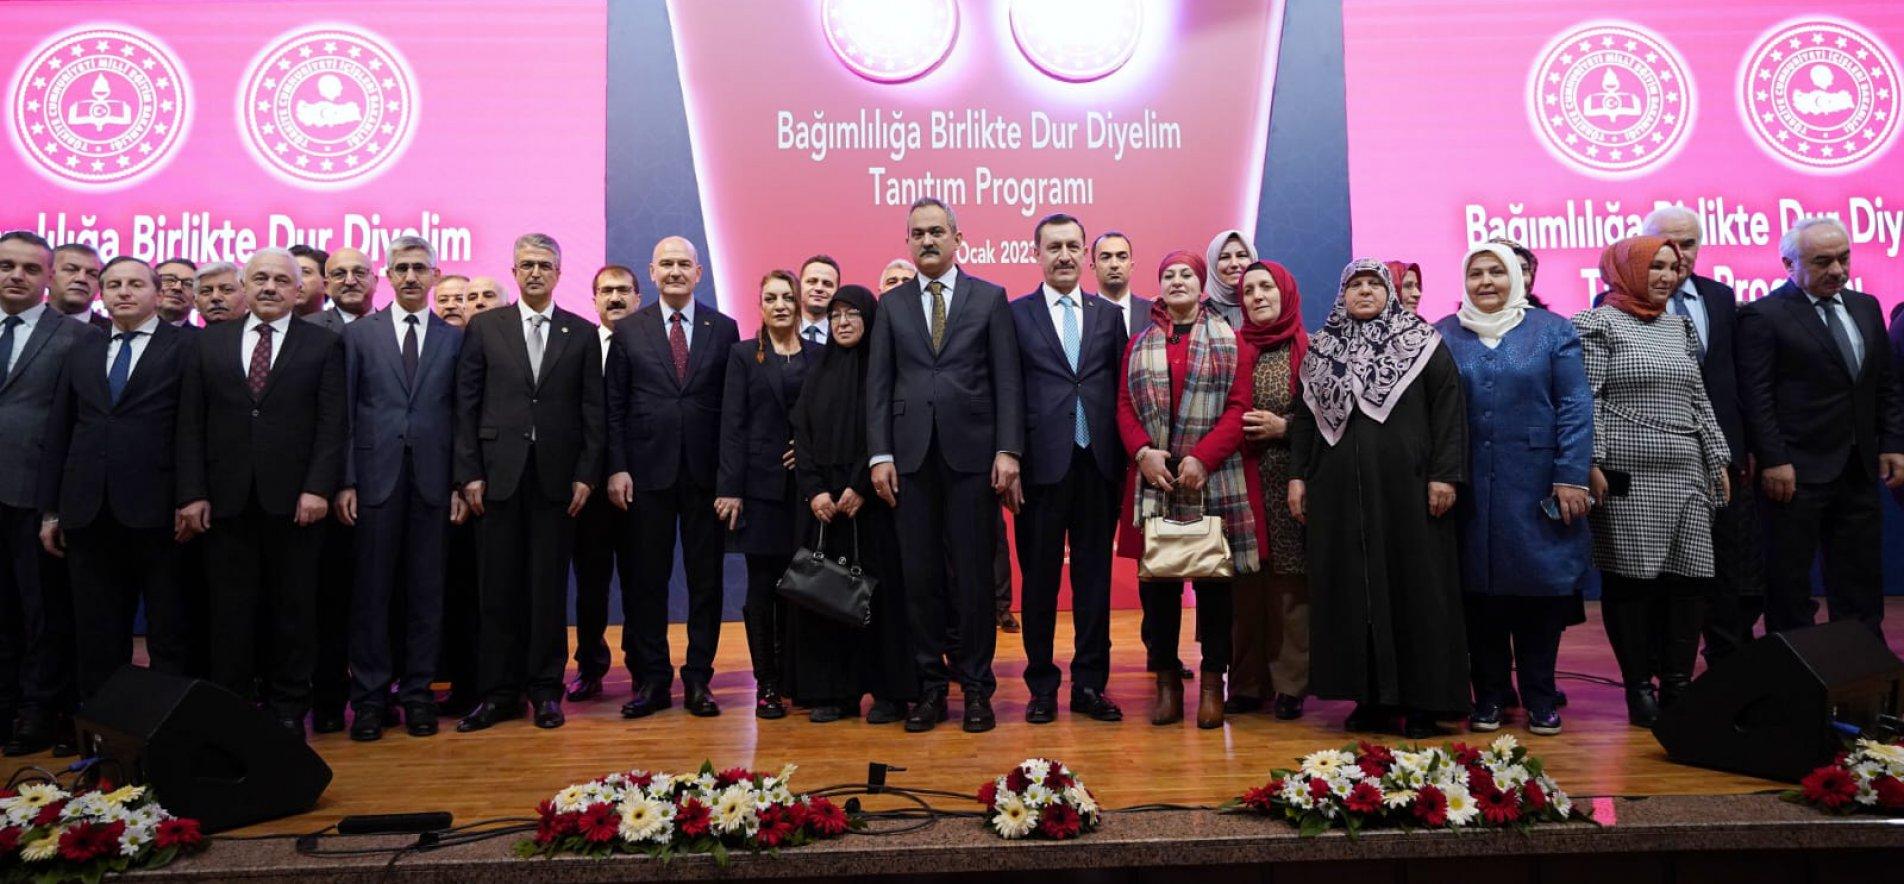 MINISTRY OF NATIONAL EDUCATION AND MINISTRY OF INTERIOR SAY STOP TO ADDICTION TOGETHER